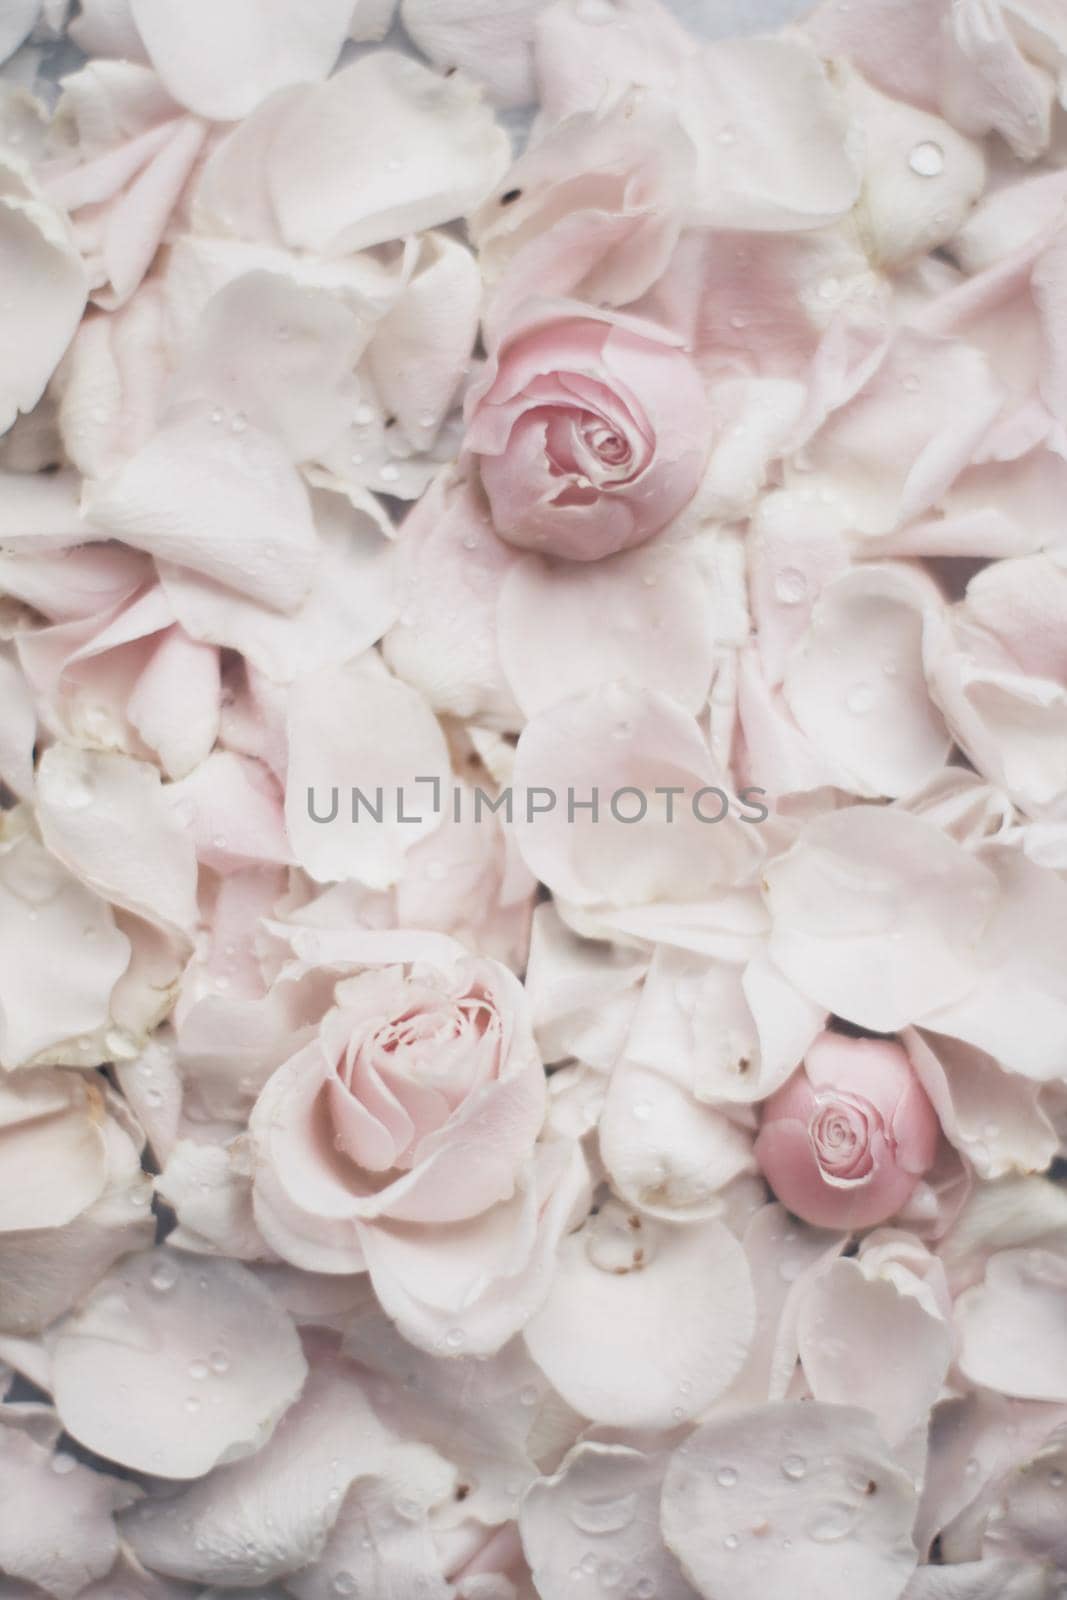 rose flower petals on marble - wedding, holiday and floral garden styled concept by Anneleven